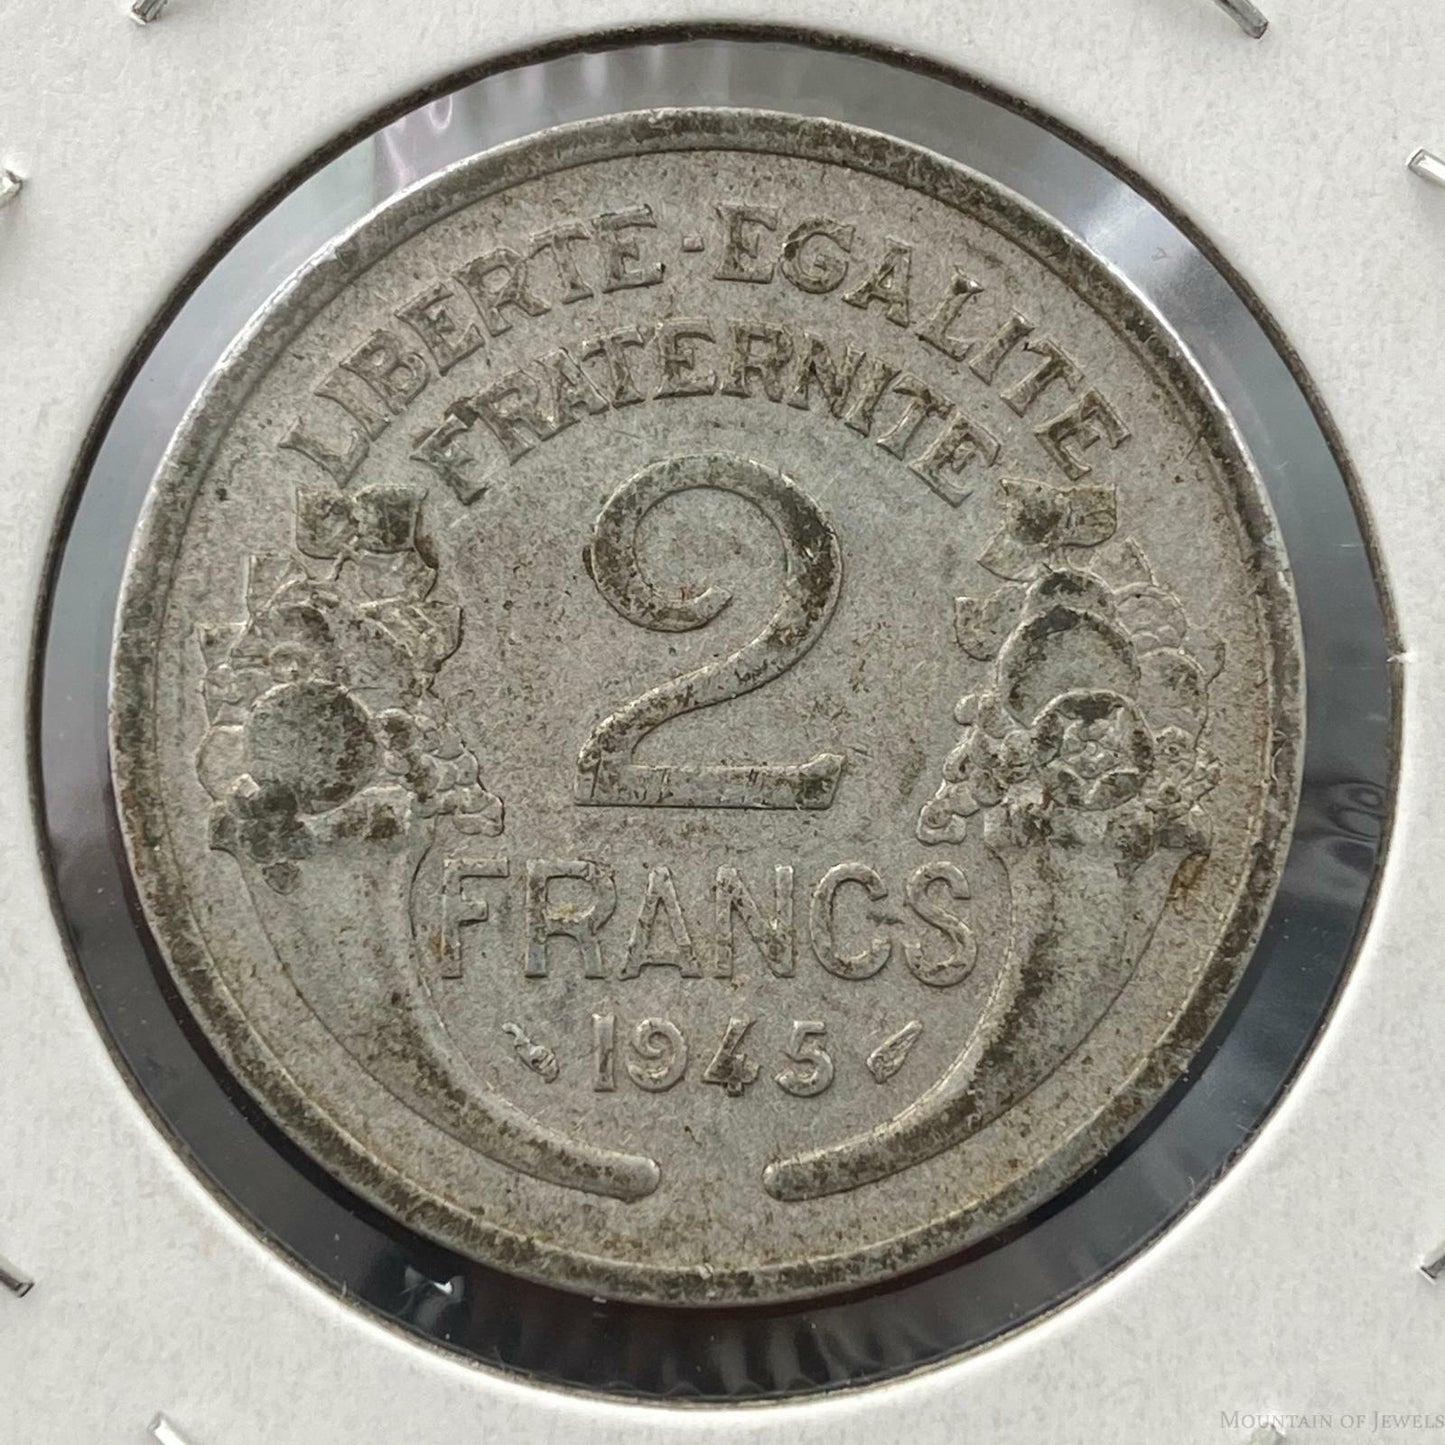 1945 France 2 Francs KM886a.1 WWII Liberty Head Collectible Coin #73120-6